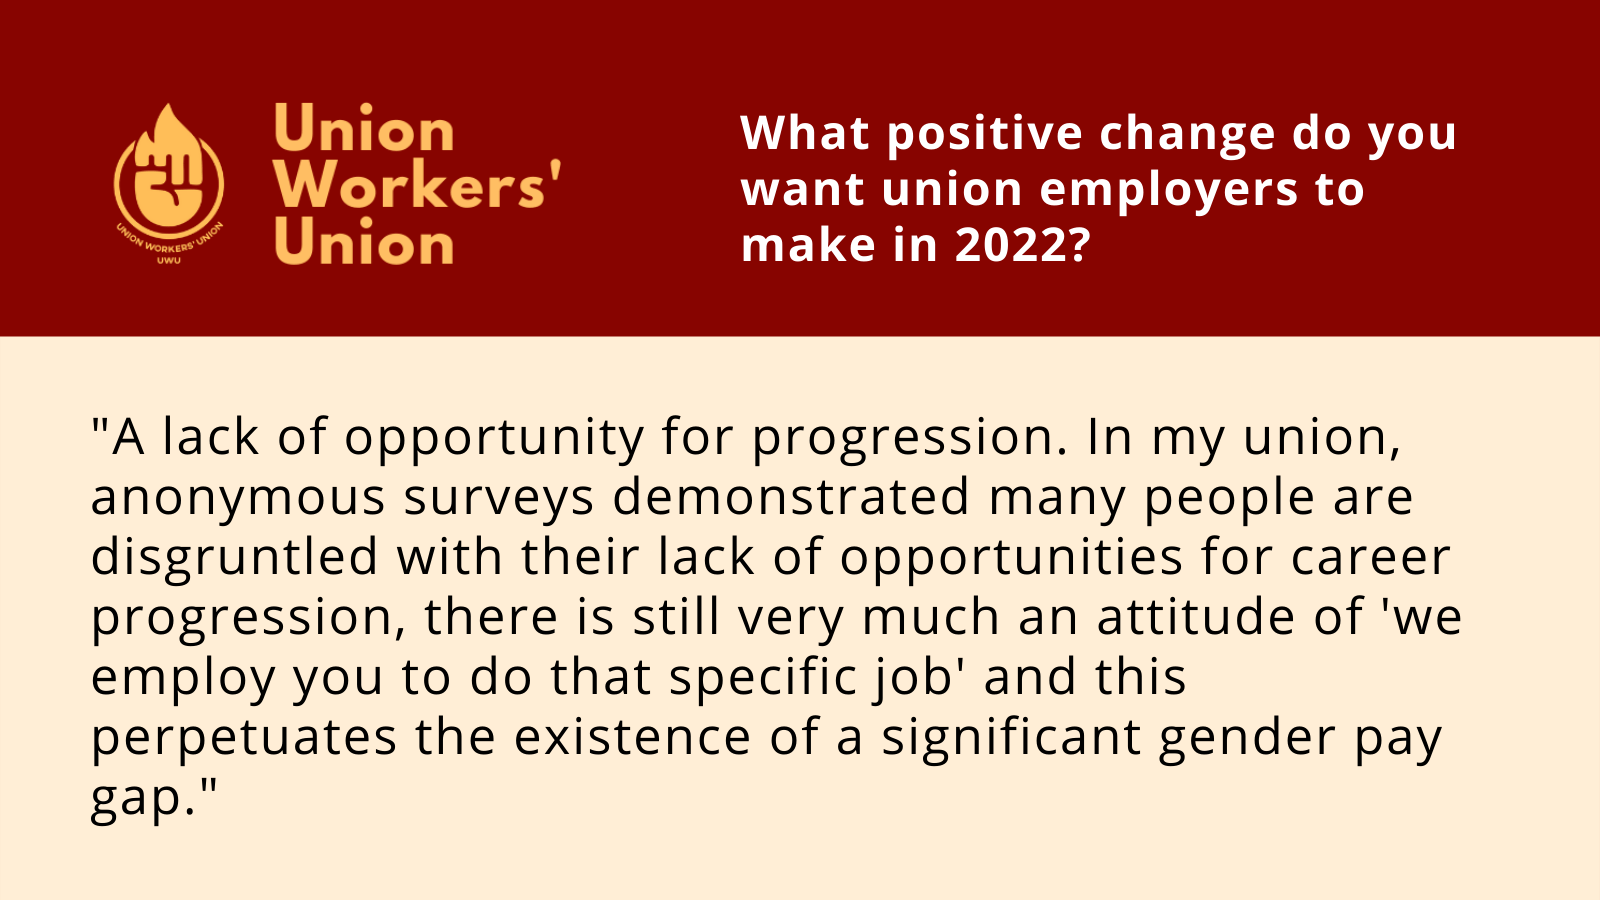 UWU logo next to the question, what positive change do you want union employers to make in 2022? Member response: A lack of opportunity for progression. In my union, anonymous surveys demonstrated many people are disgruntled with their lack of opportunities for career progression, there is still very much an attitude of 'we employ you to do that specific job' and this perpetuates the existence of a significant gender pay gap.